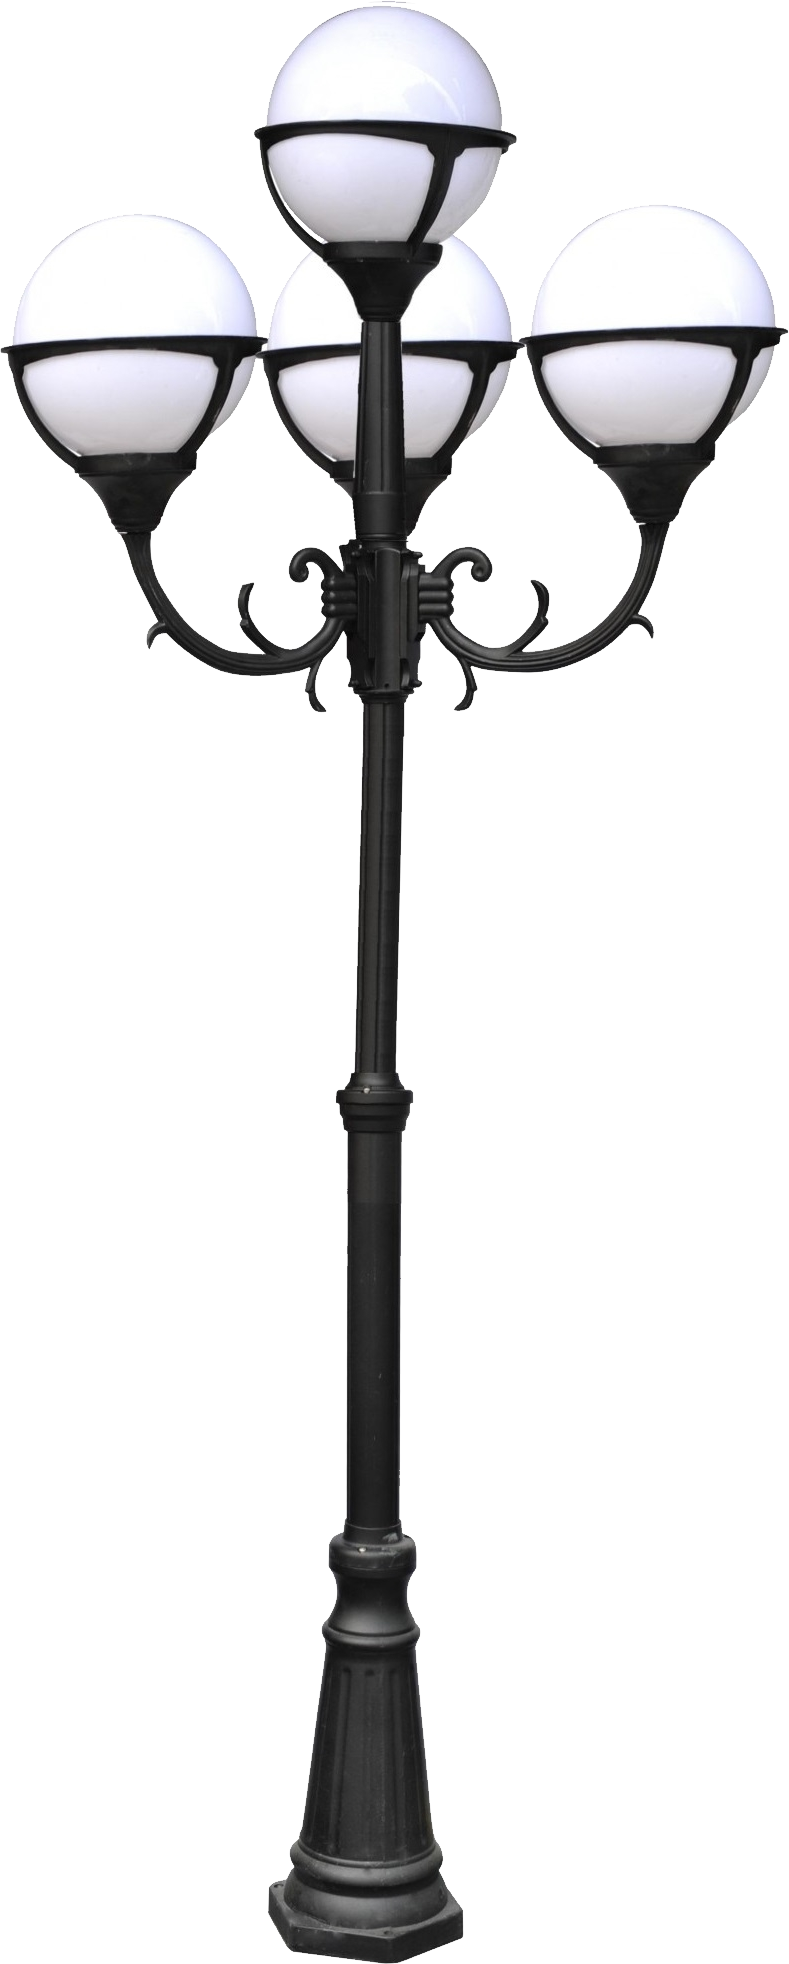 Lantern clipart lamp post, Lantern lamp post Transparent FREE for download on WebStockReview 2020